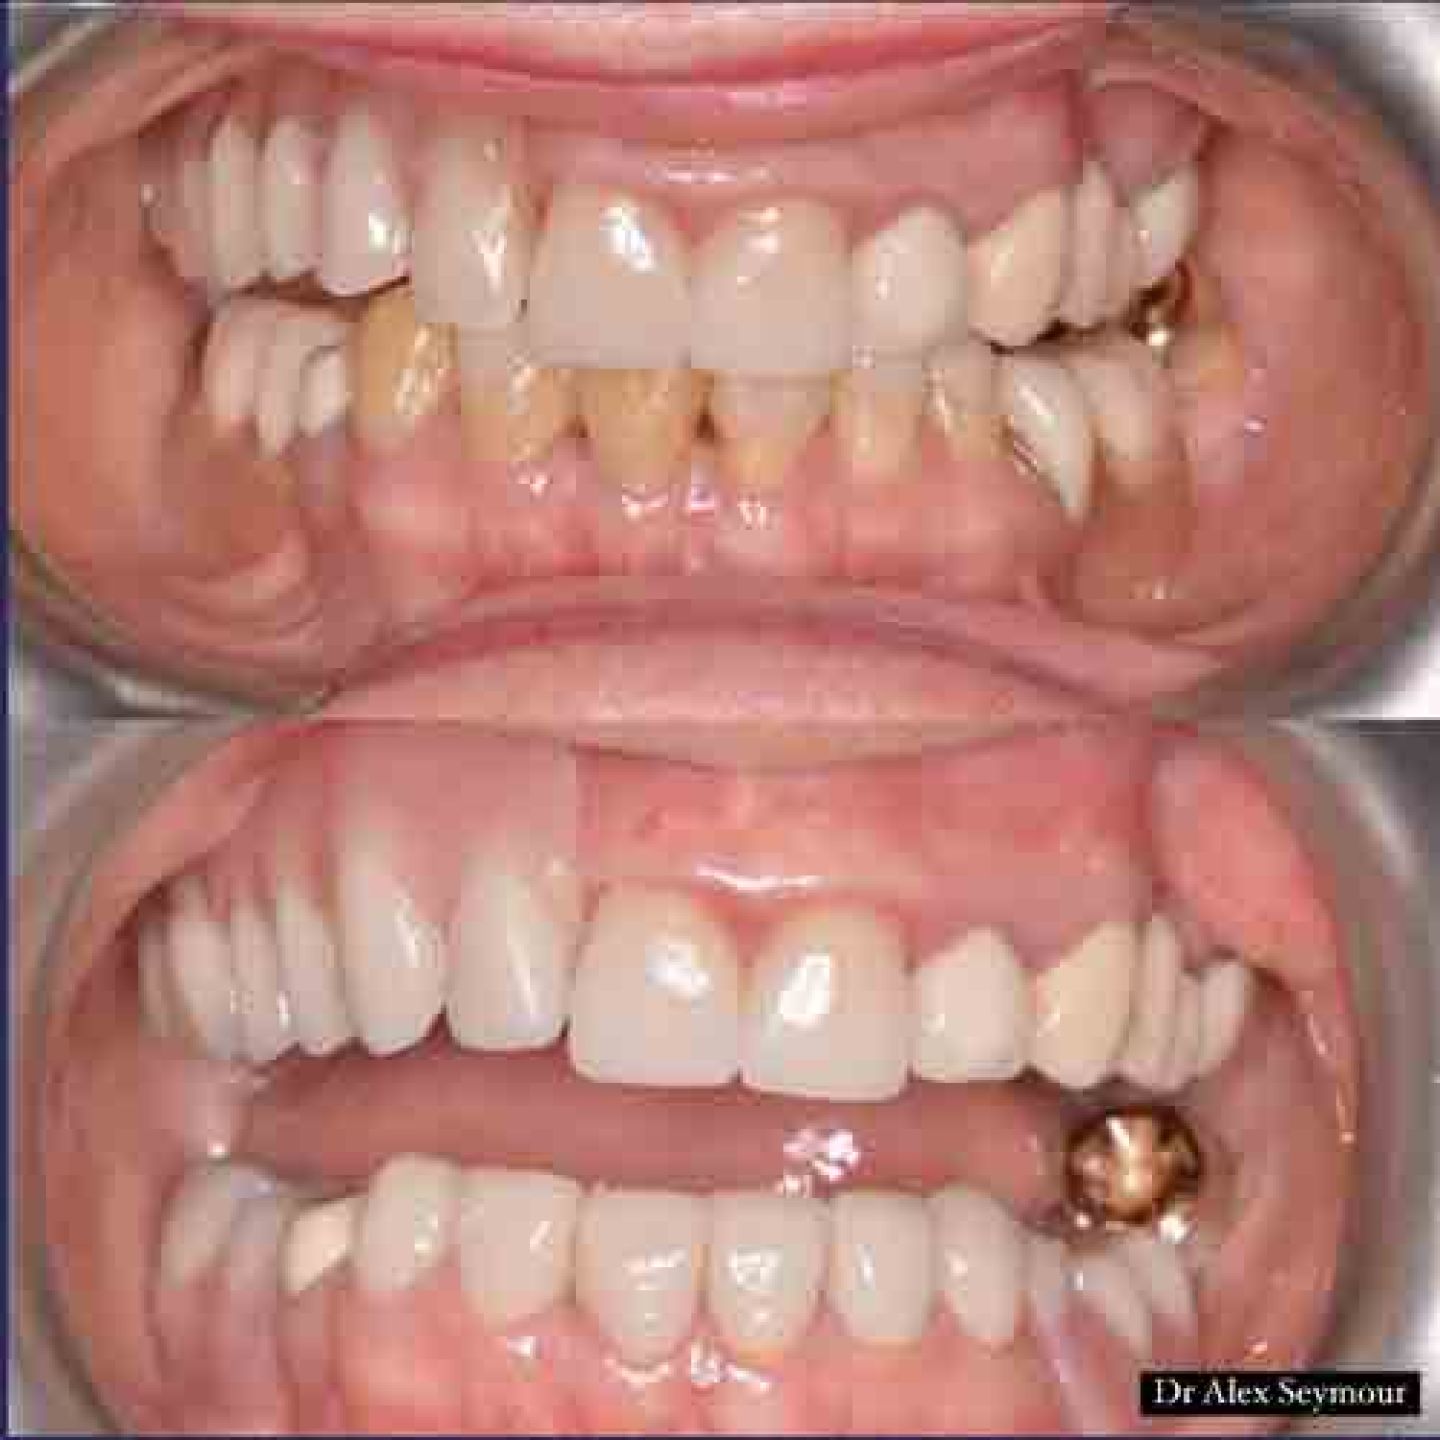 x6 lower crowns and a new upper partial denture